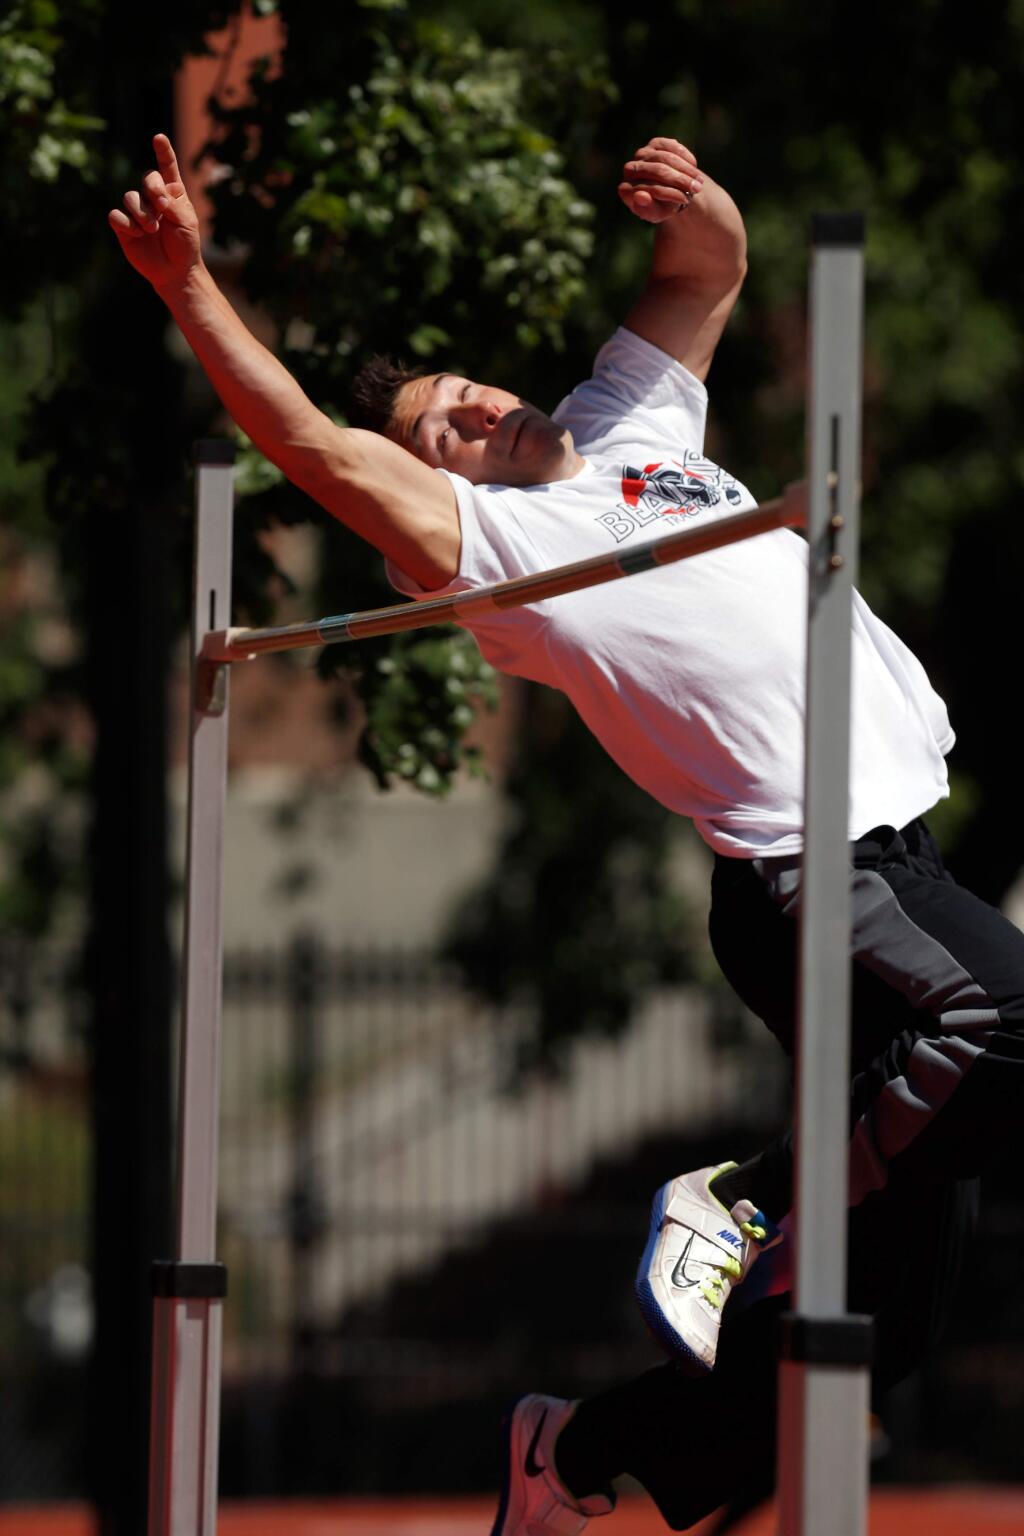 SRJC decathlete Kasey Mancini takes a turn at the high jump during track and field practice at Santa Rosa Junior College in Santa Rosa, California on Wednesday, April 27, 2016. (Alvin Jornada / The Press Democrat)